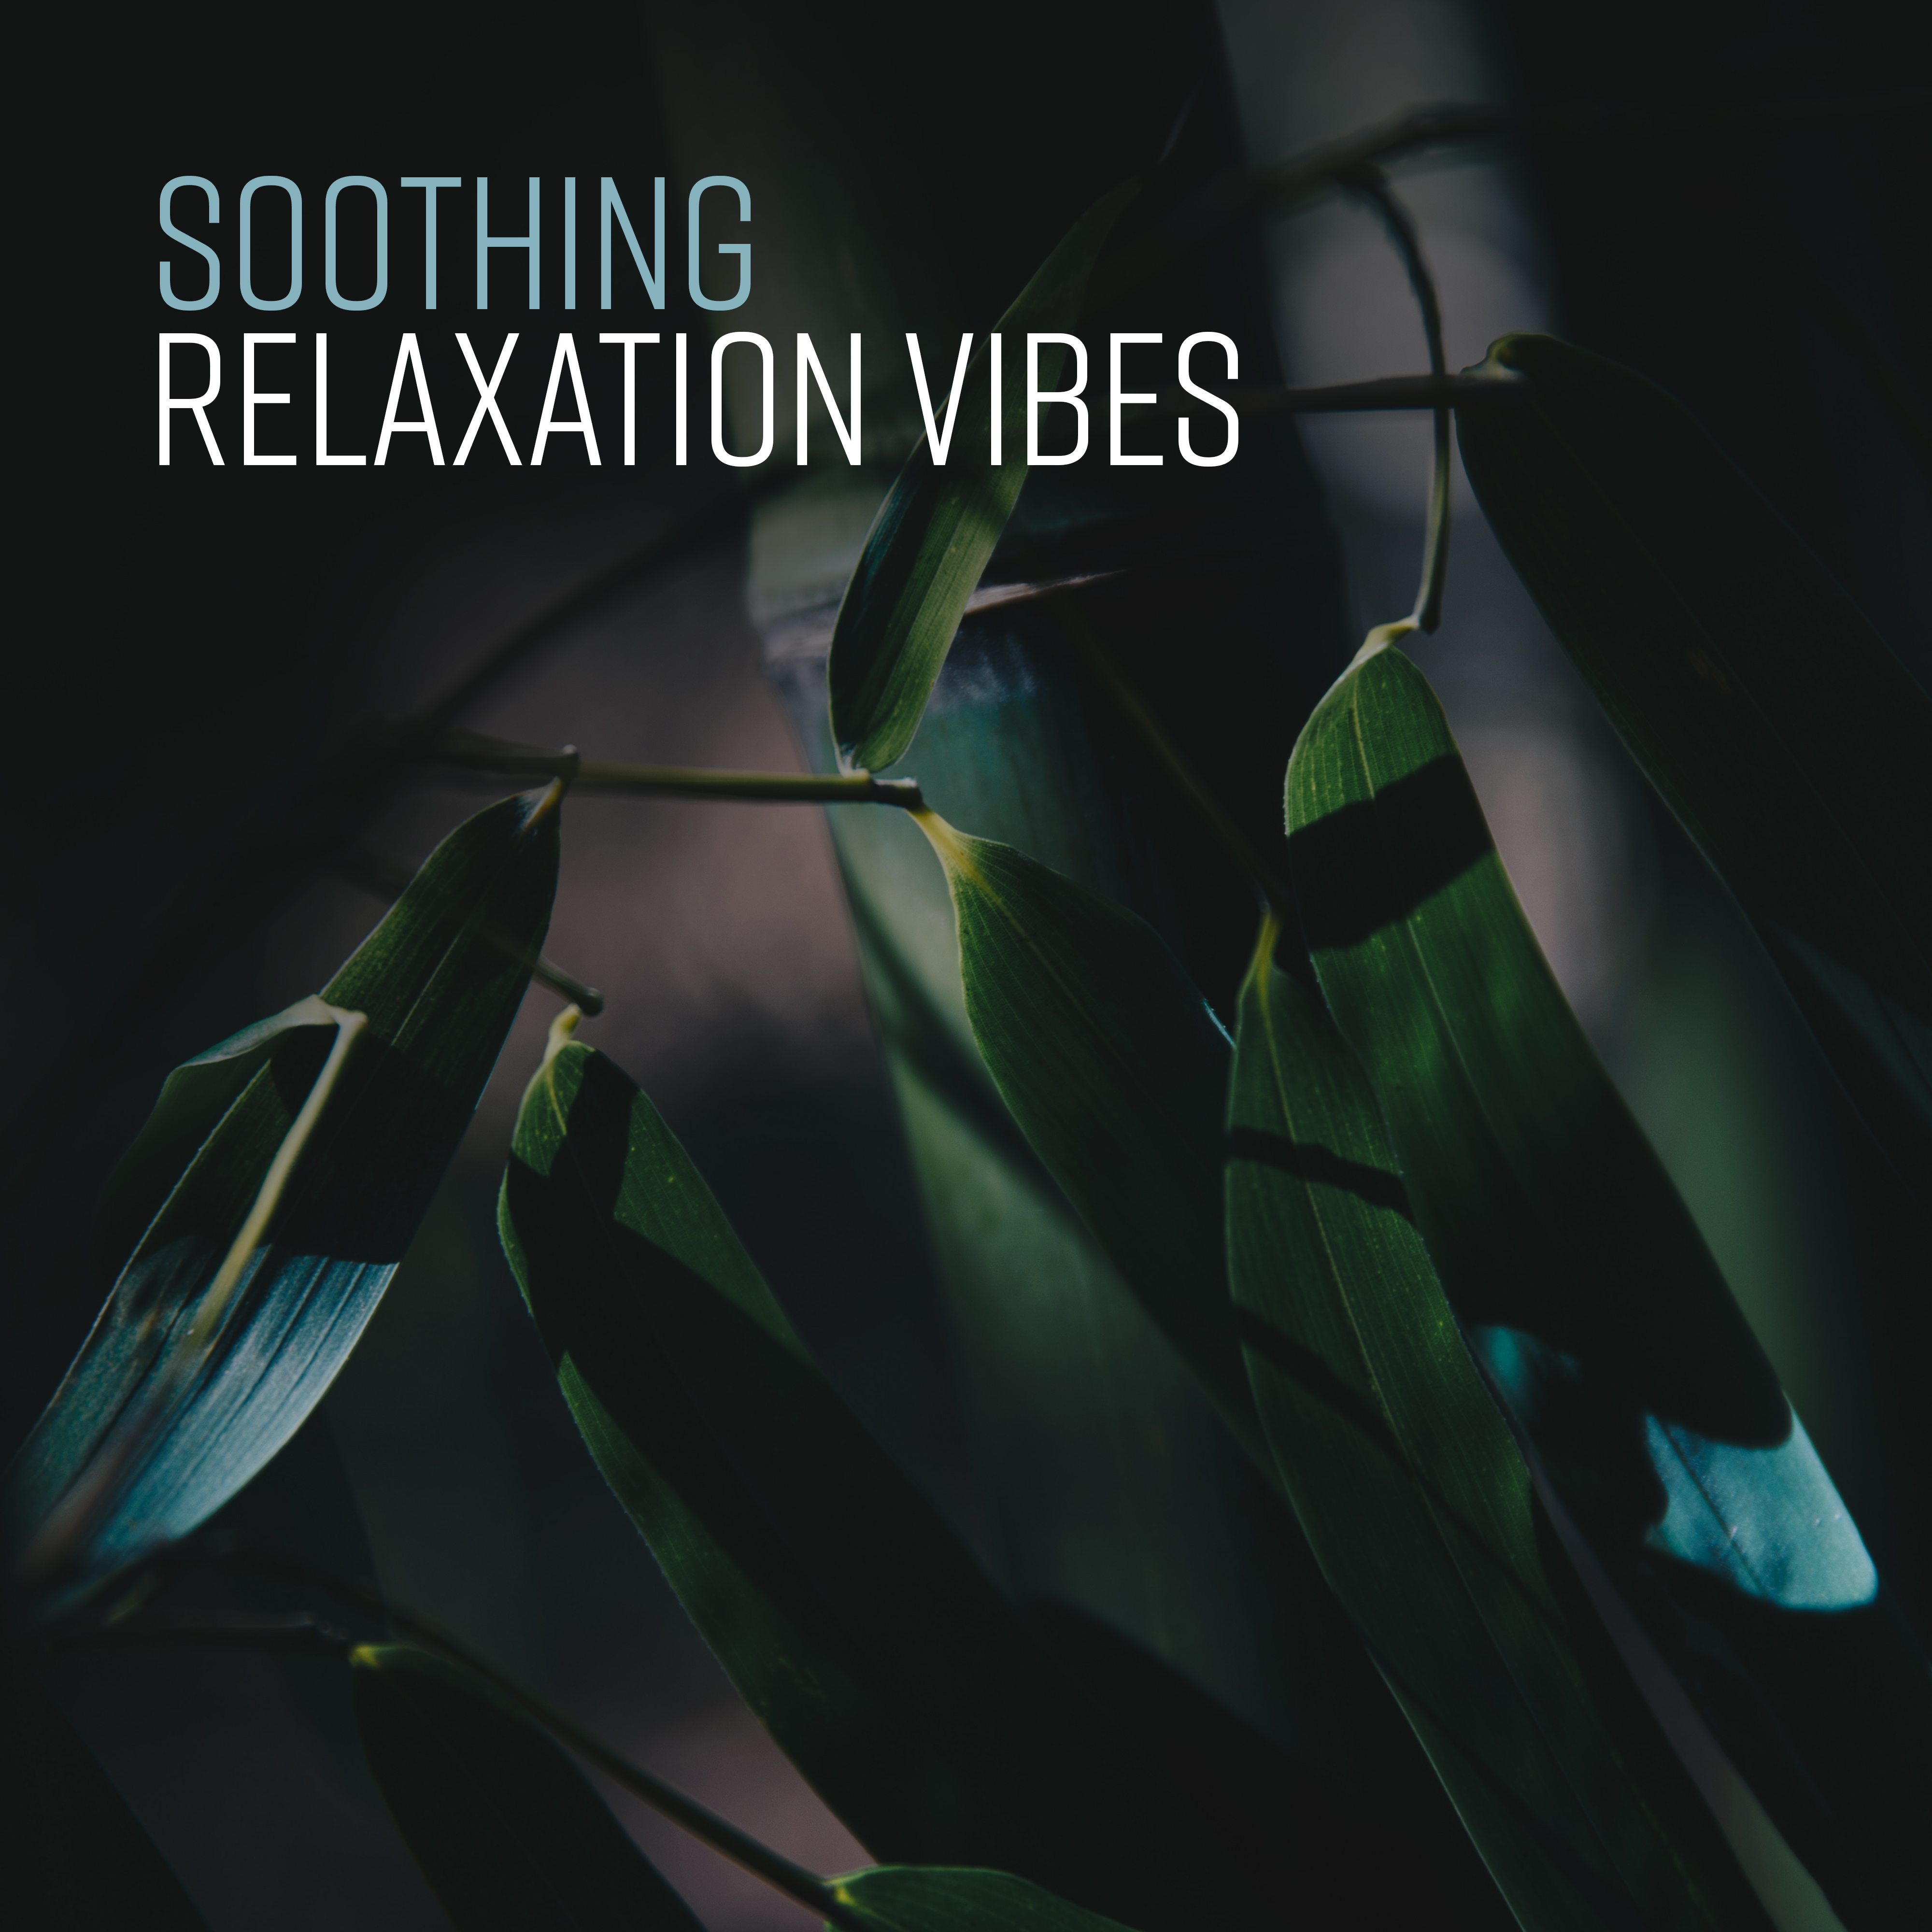 Soothing Relaxation Vibes